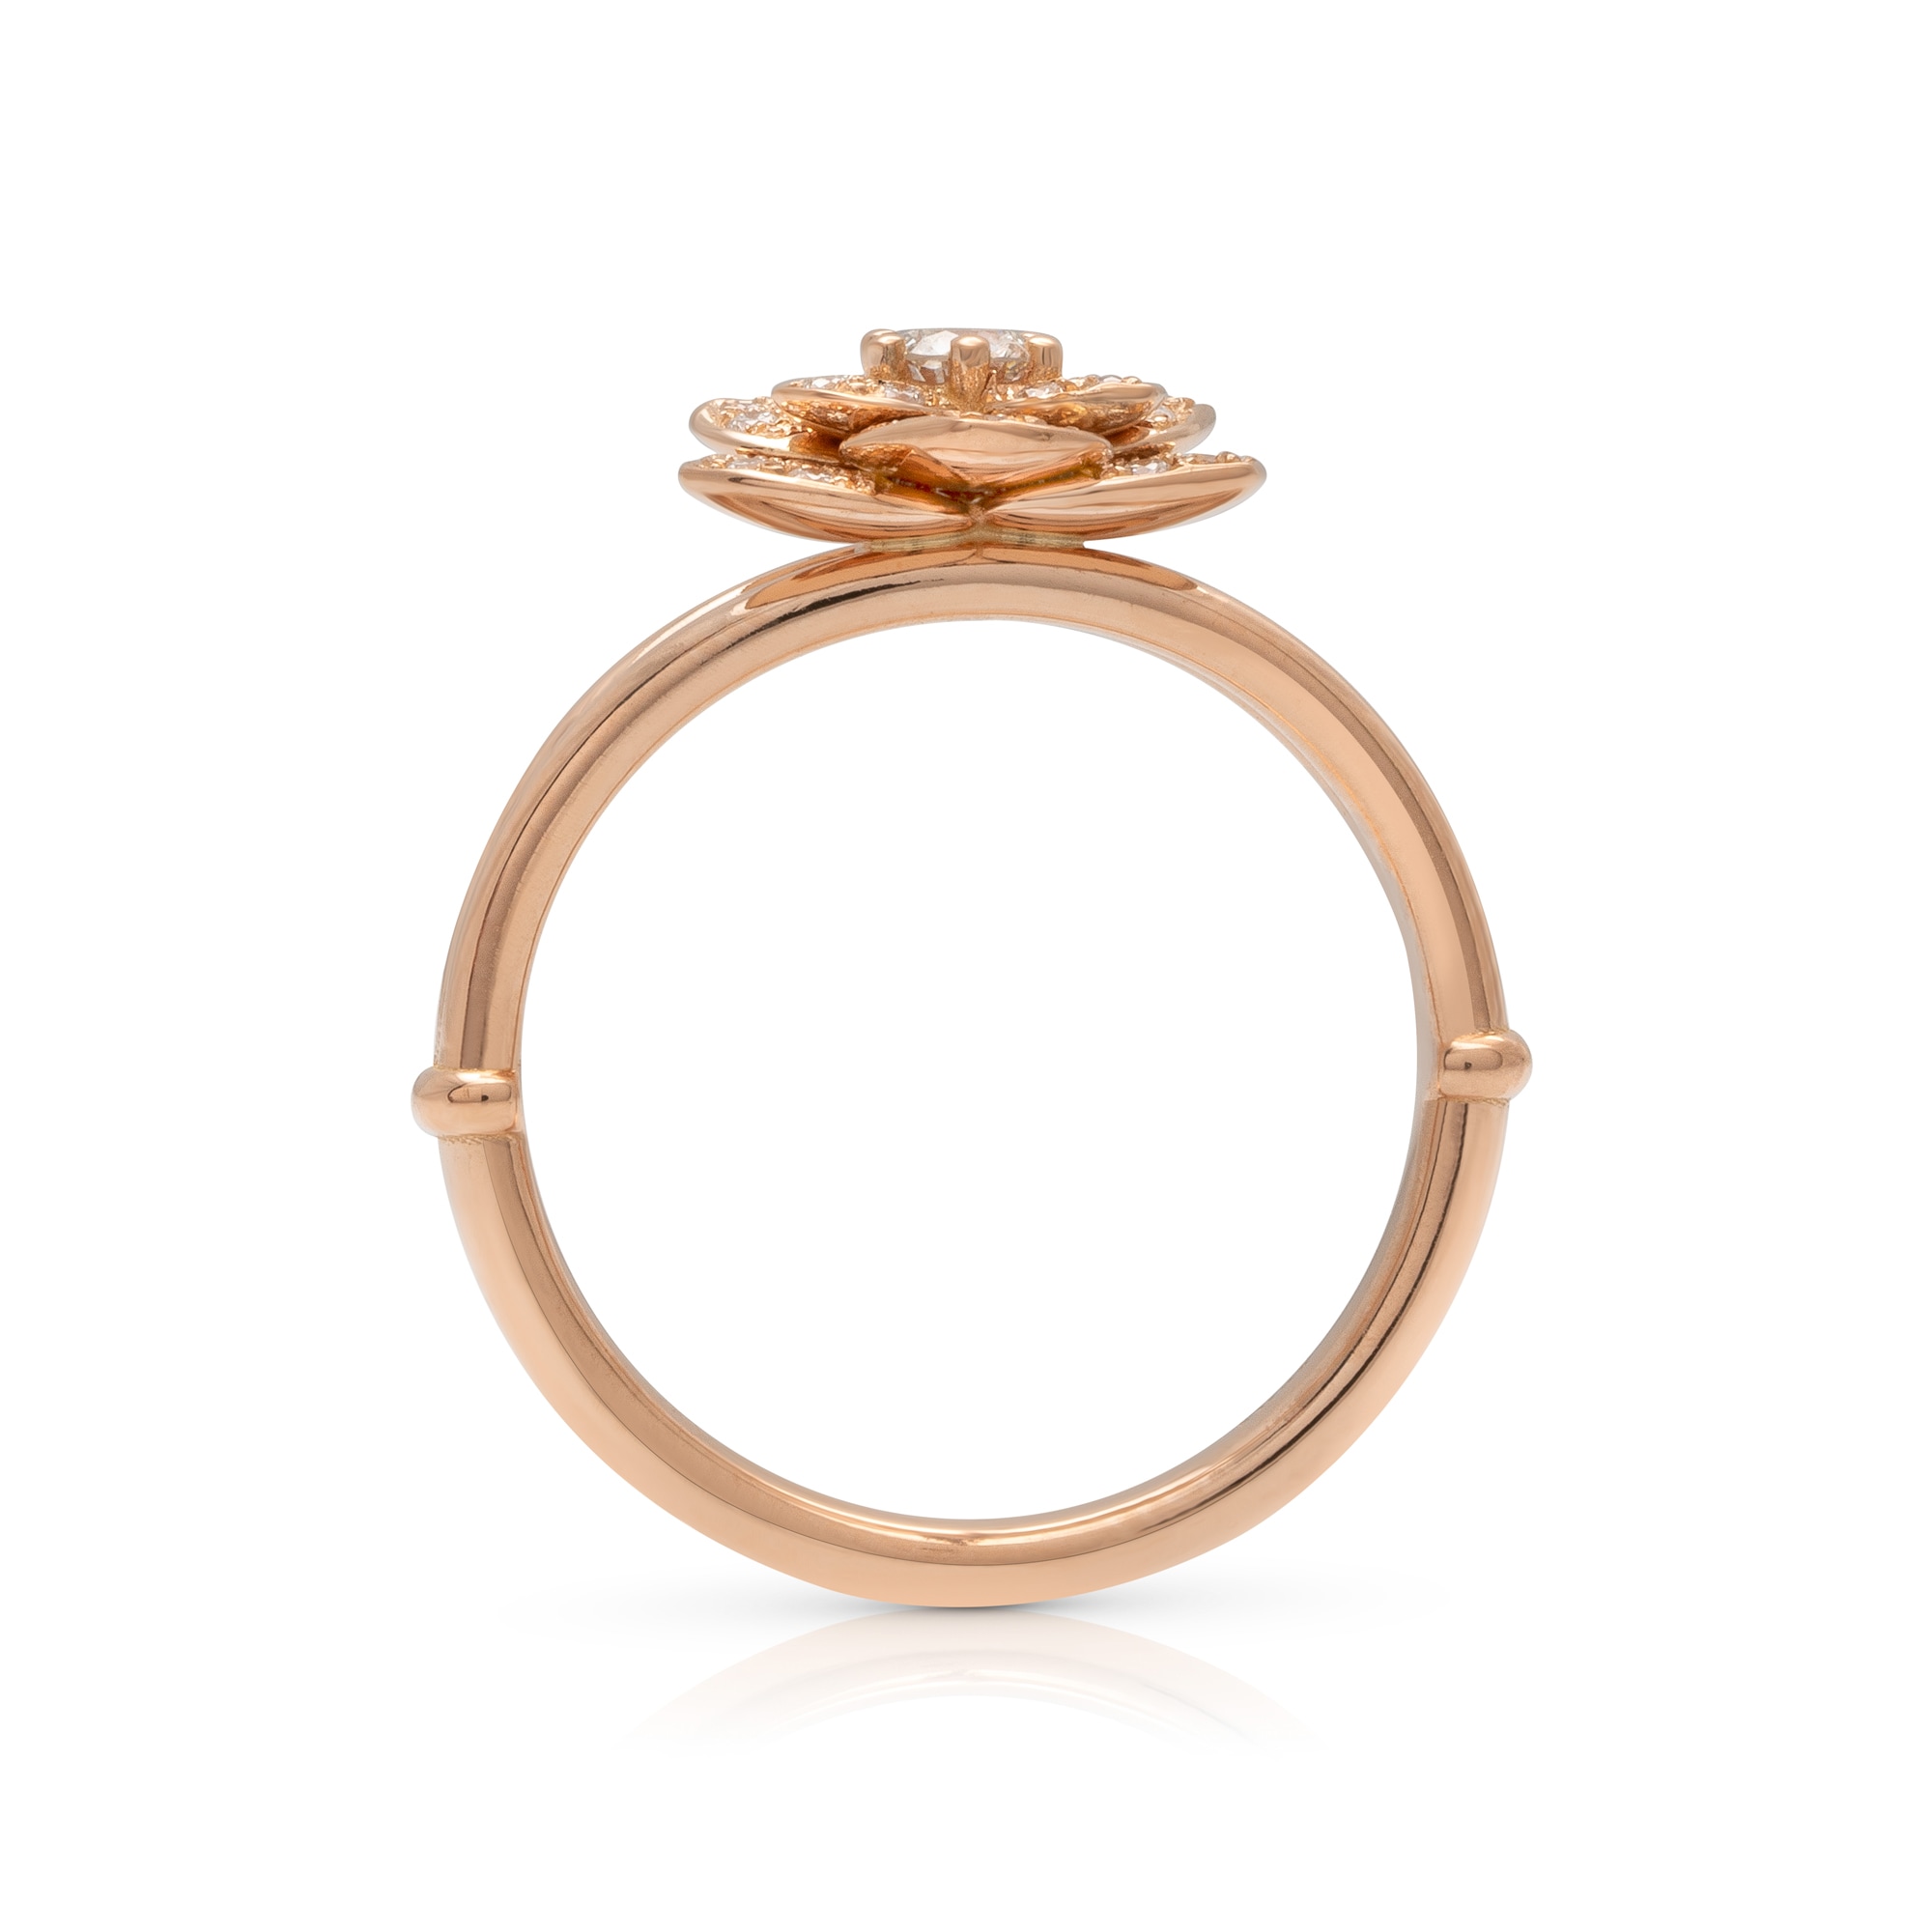 Unique 14K Rose Gold Diamond Engagement Ring Promise Ring Nature Inspired Flower Diamonds Ring Morning Dew Collection by Camellia Jewelry - 14K Rose